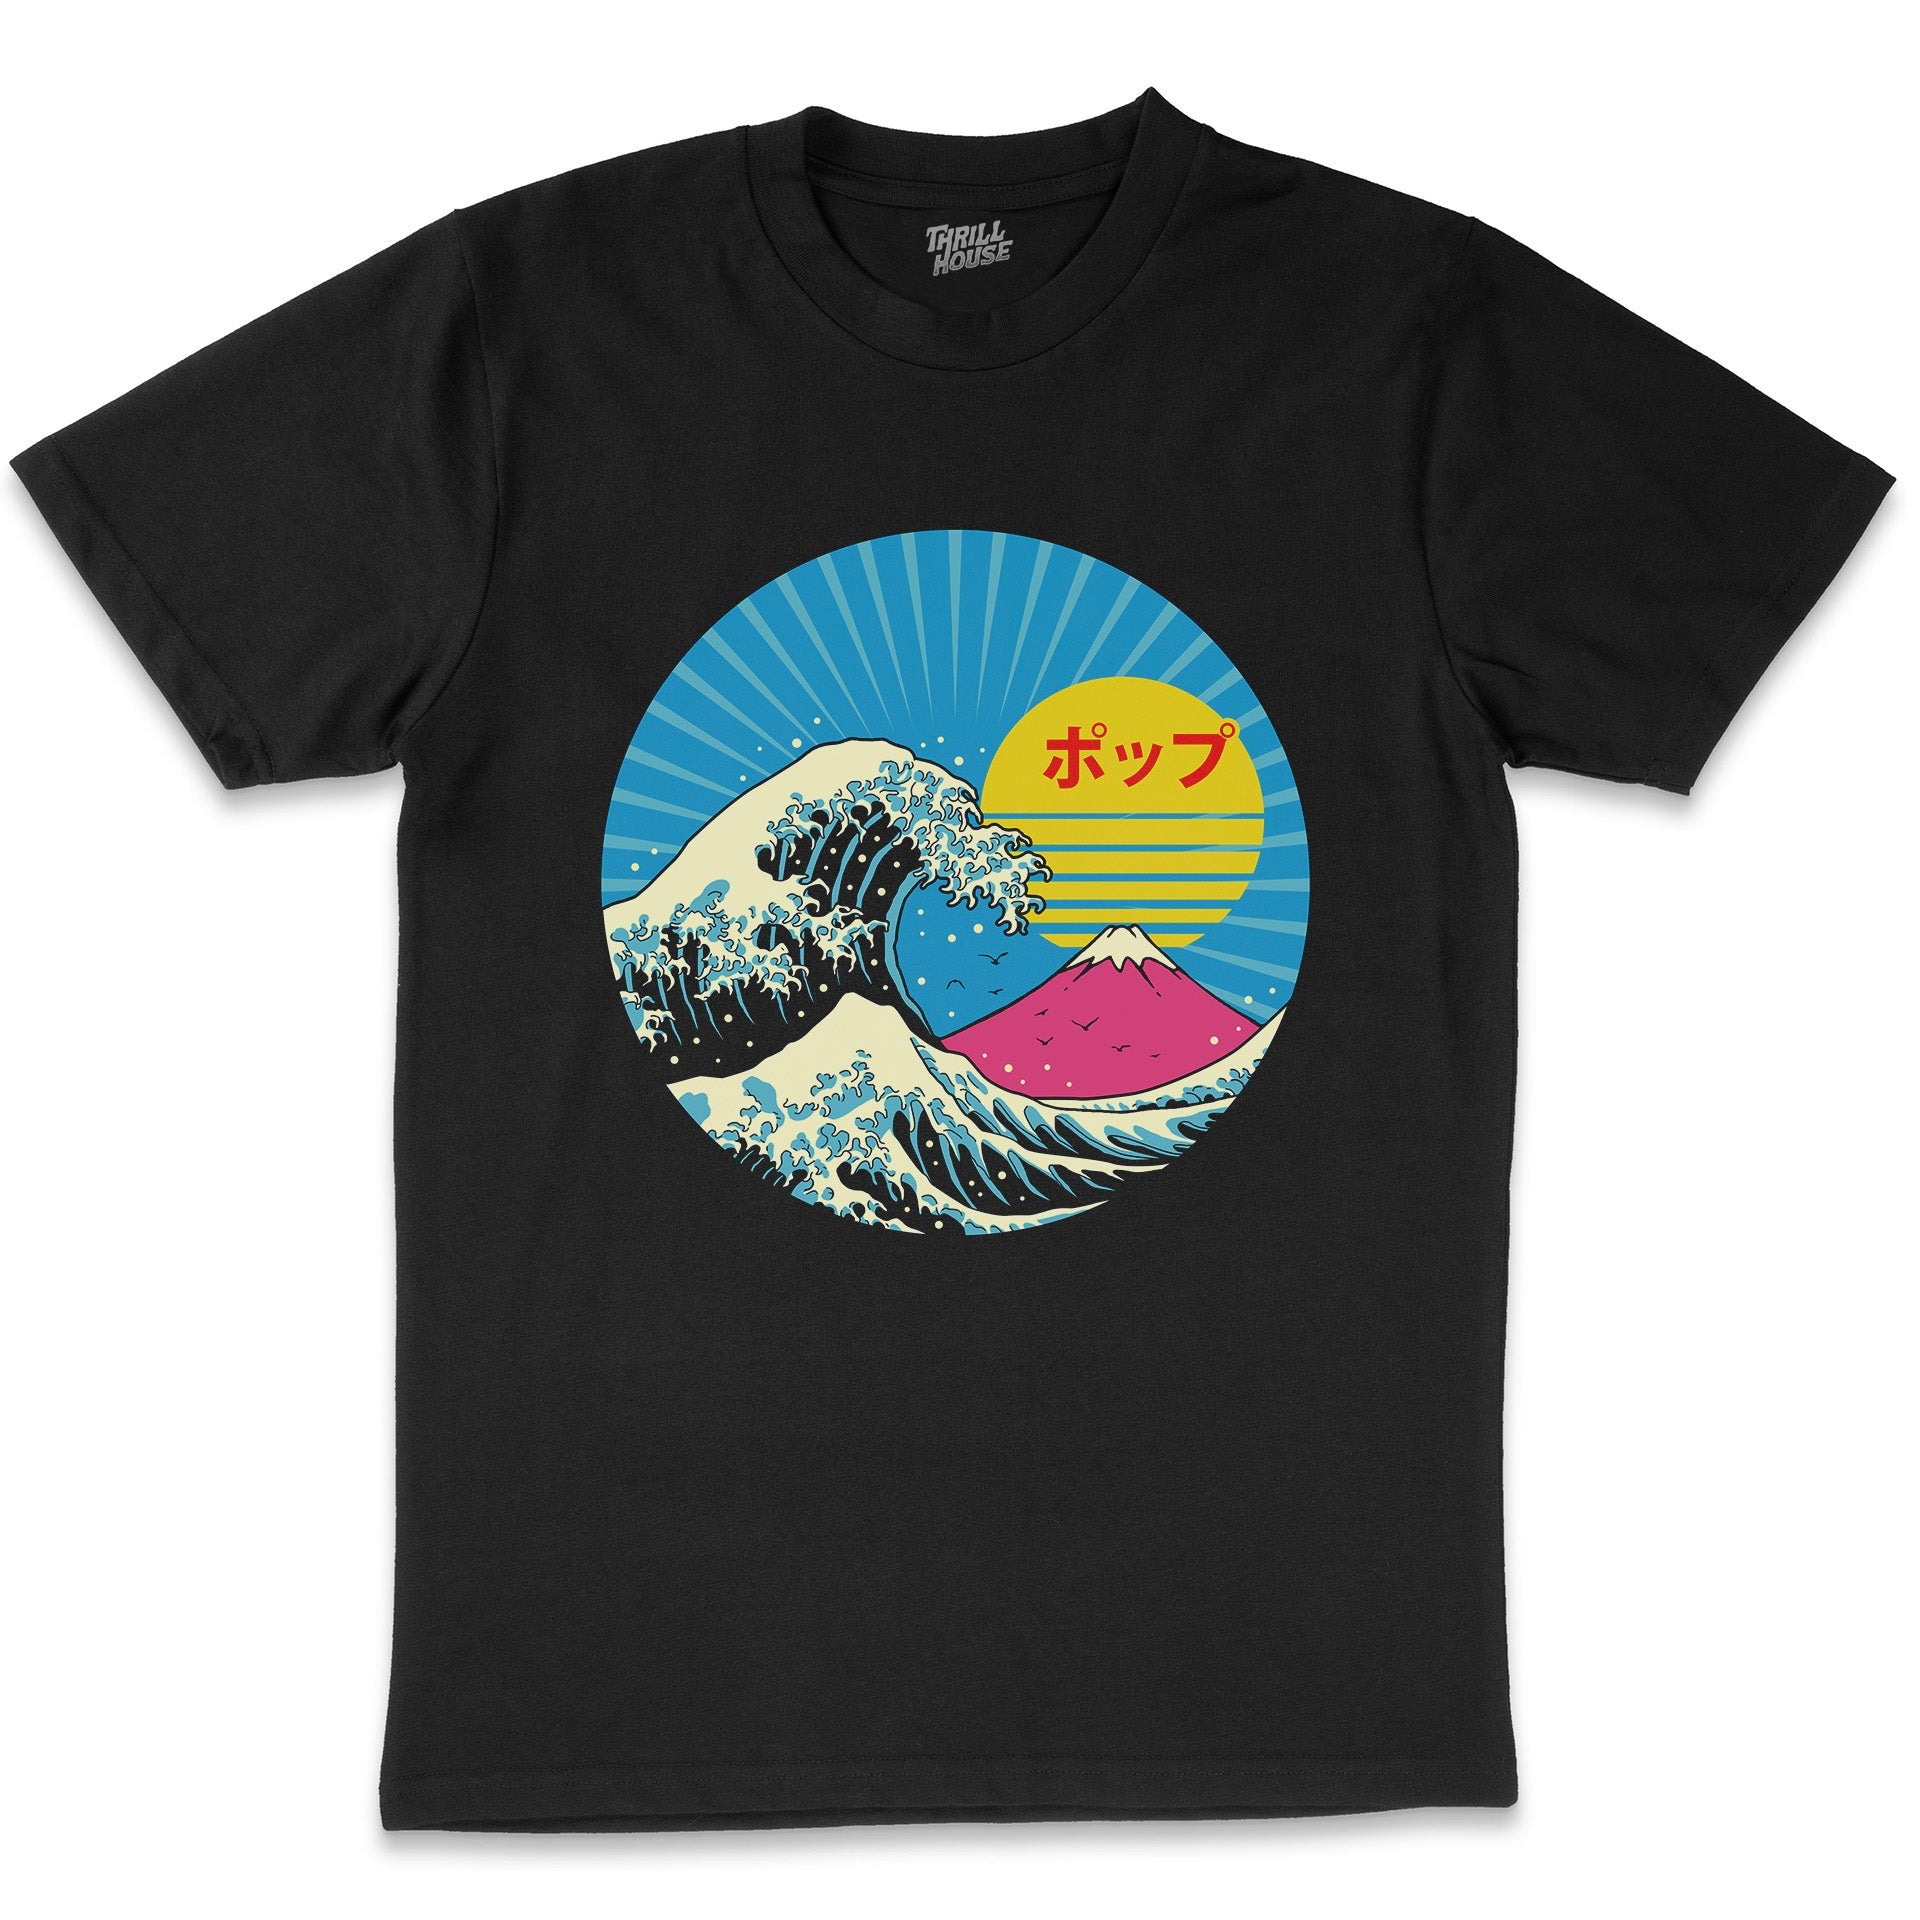 The Great Wave Of Kanagawa Inspired Great Pop Wave Artsy Japan Japanese Retro Artistic Cotton T-Shirt